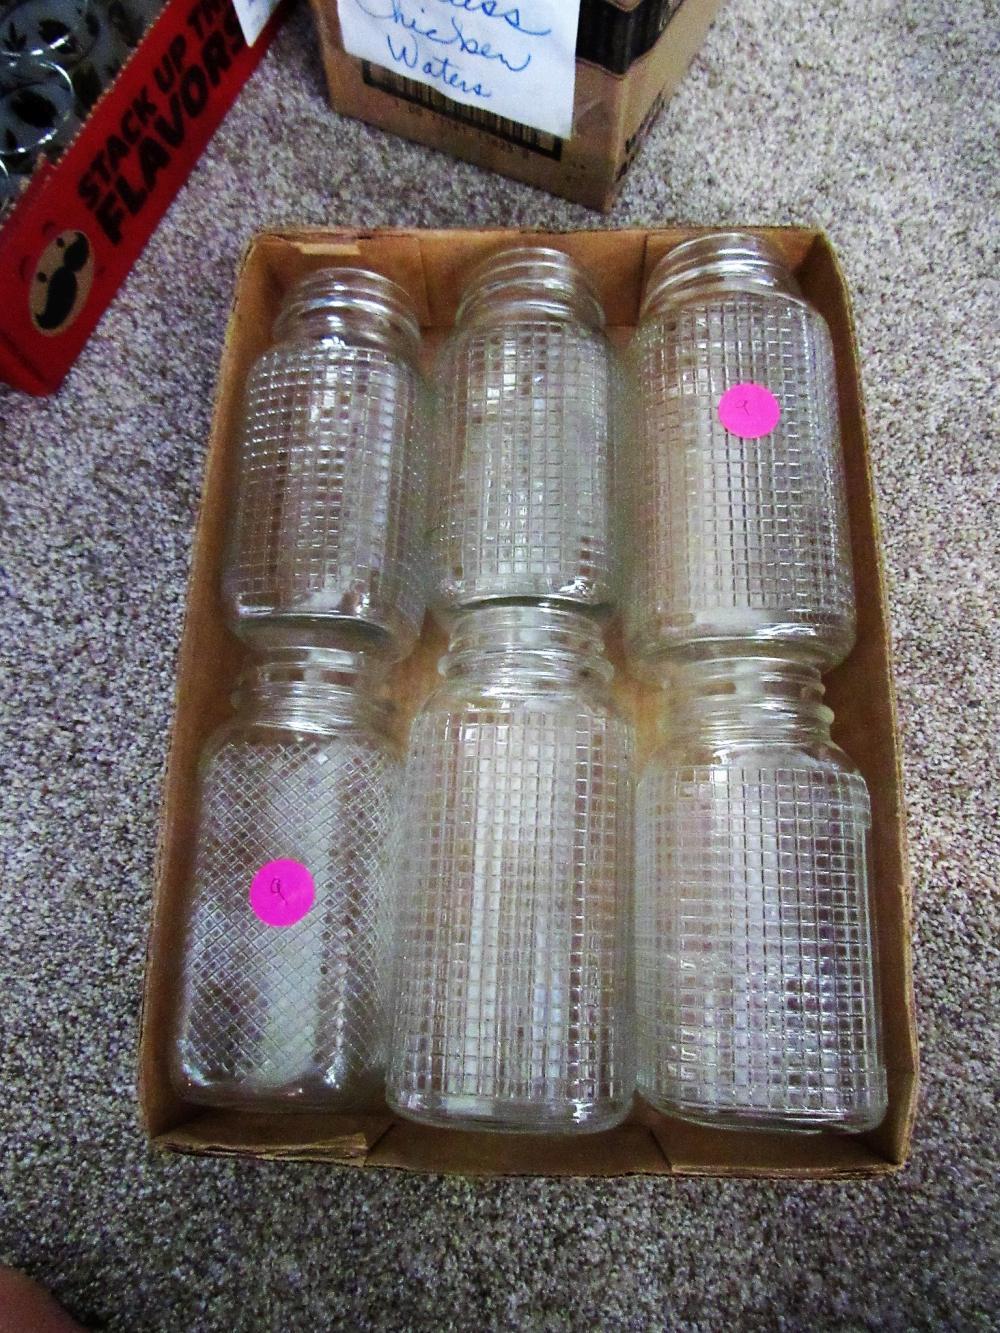 Box of 6 Patterned Jars